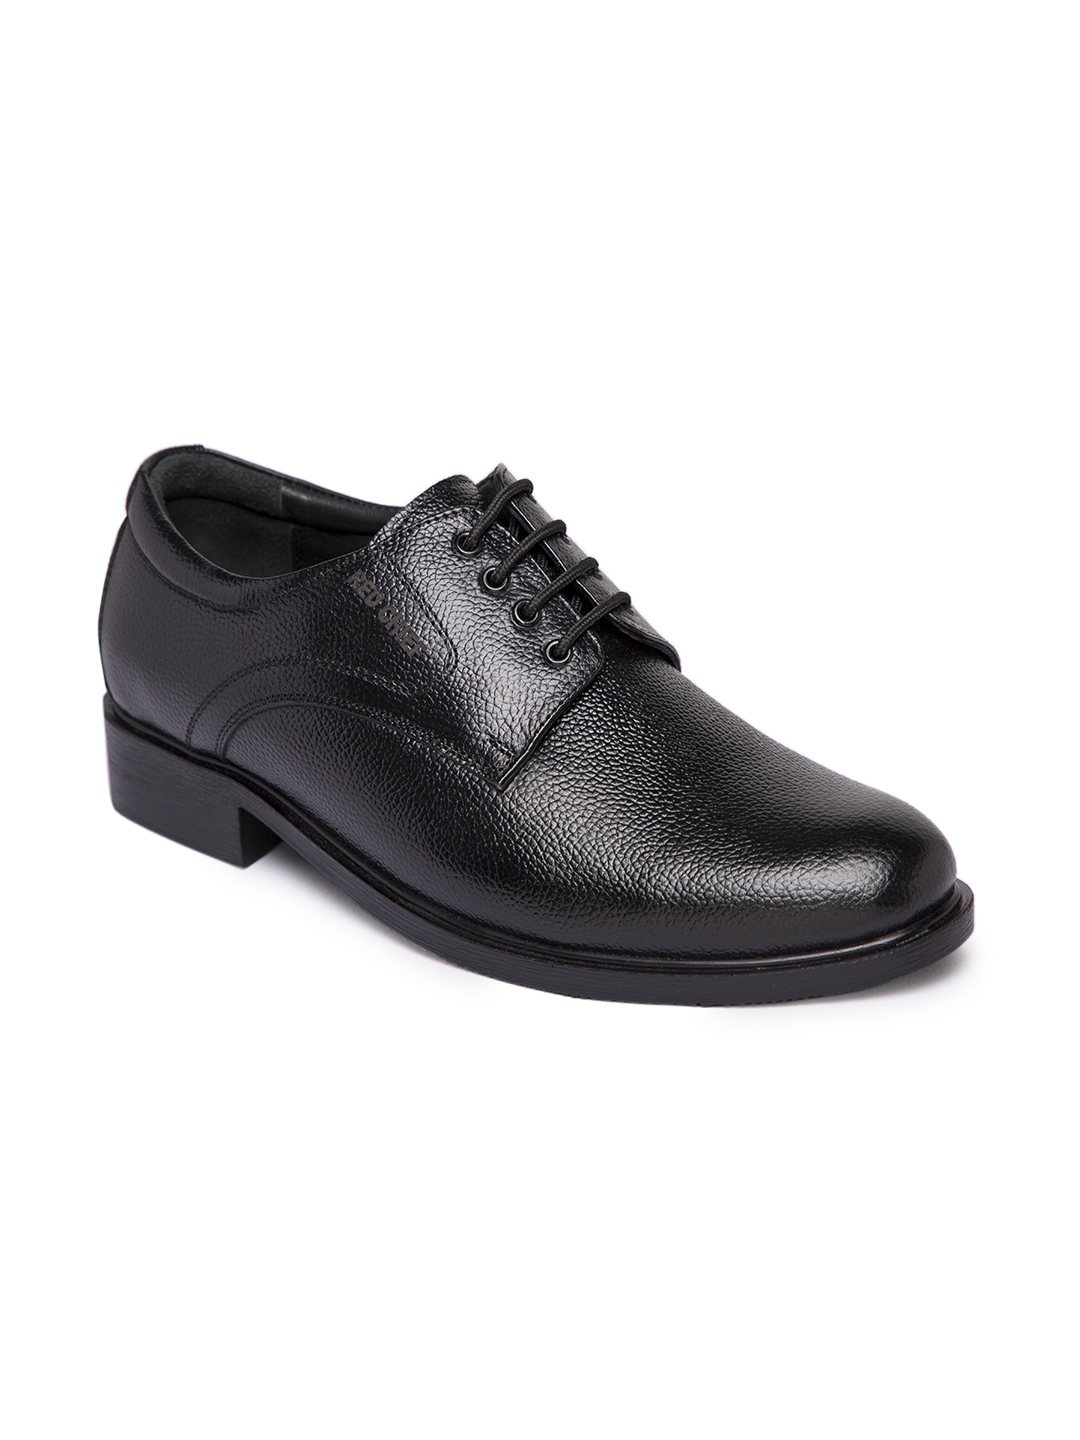 red chief black leather formal shoes